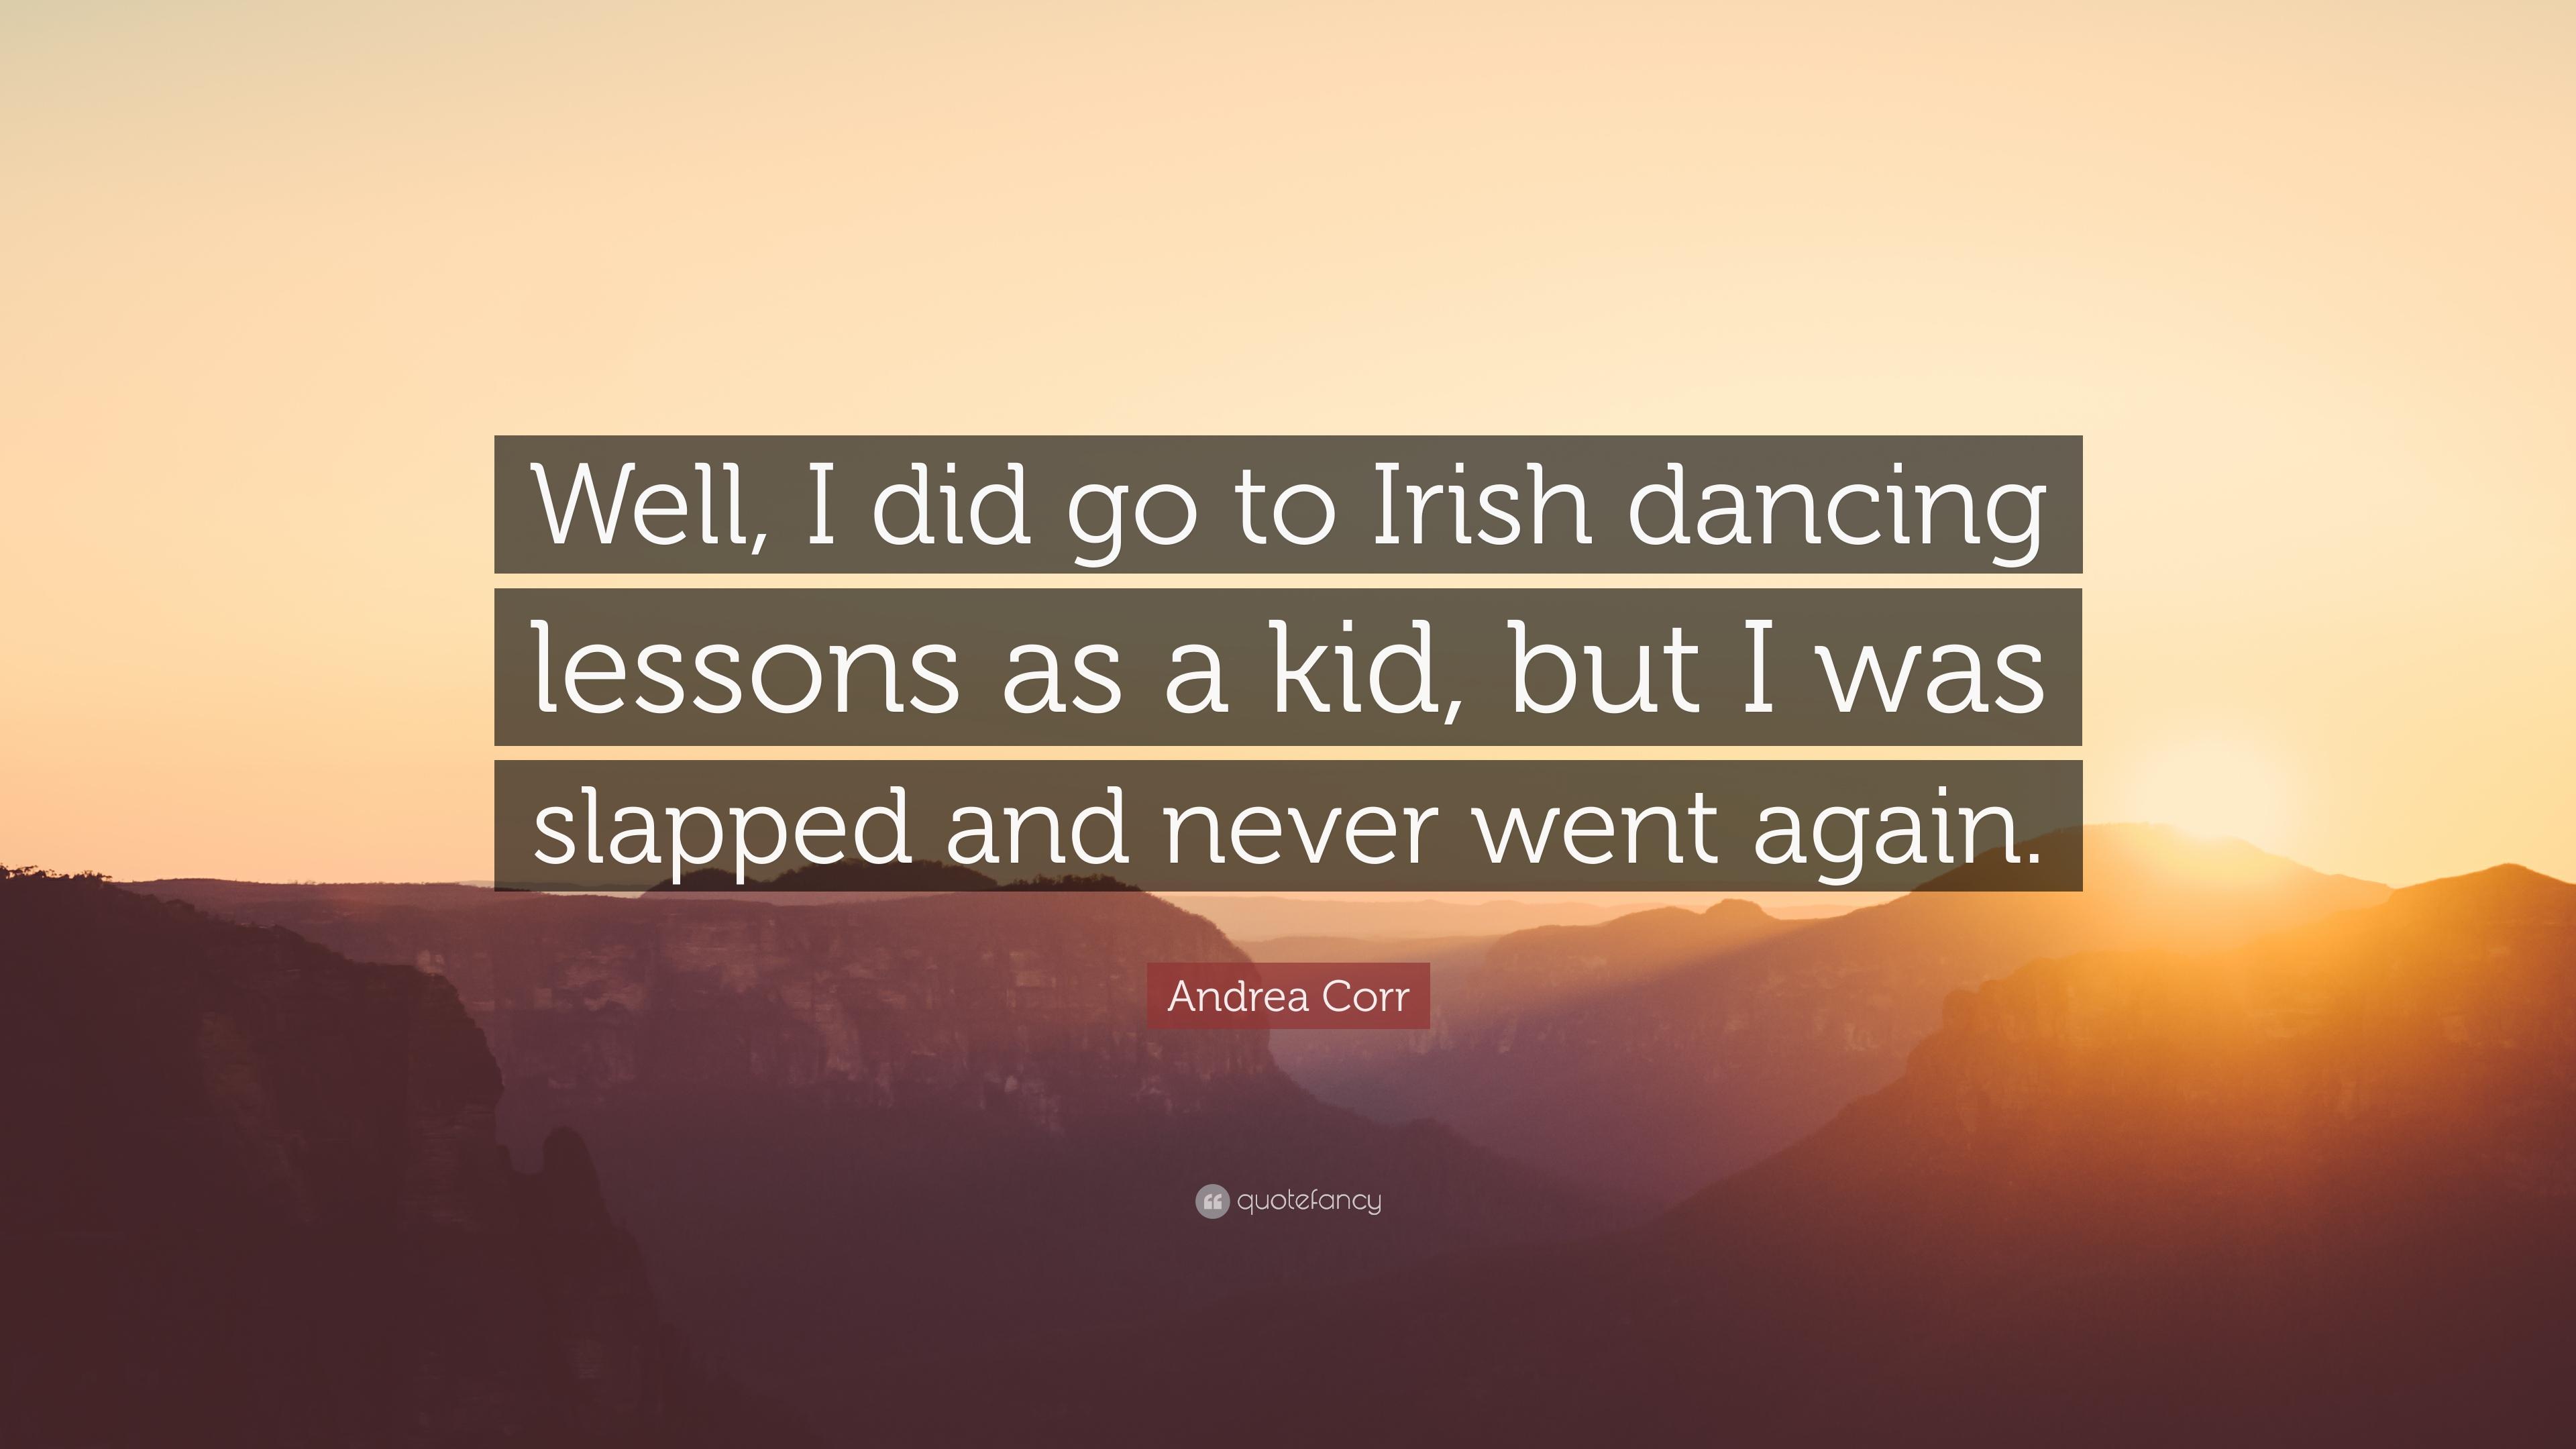 Andrea Corr Quote: “Well, I did go to Irish dancing lessons as a